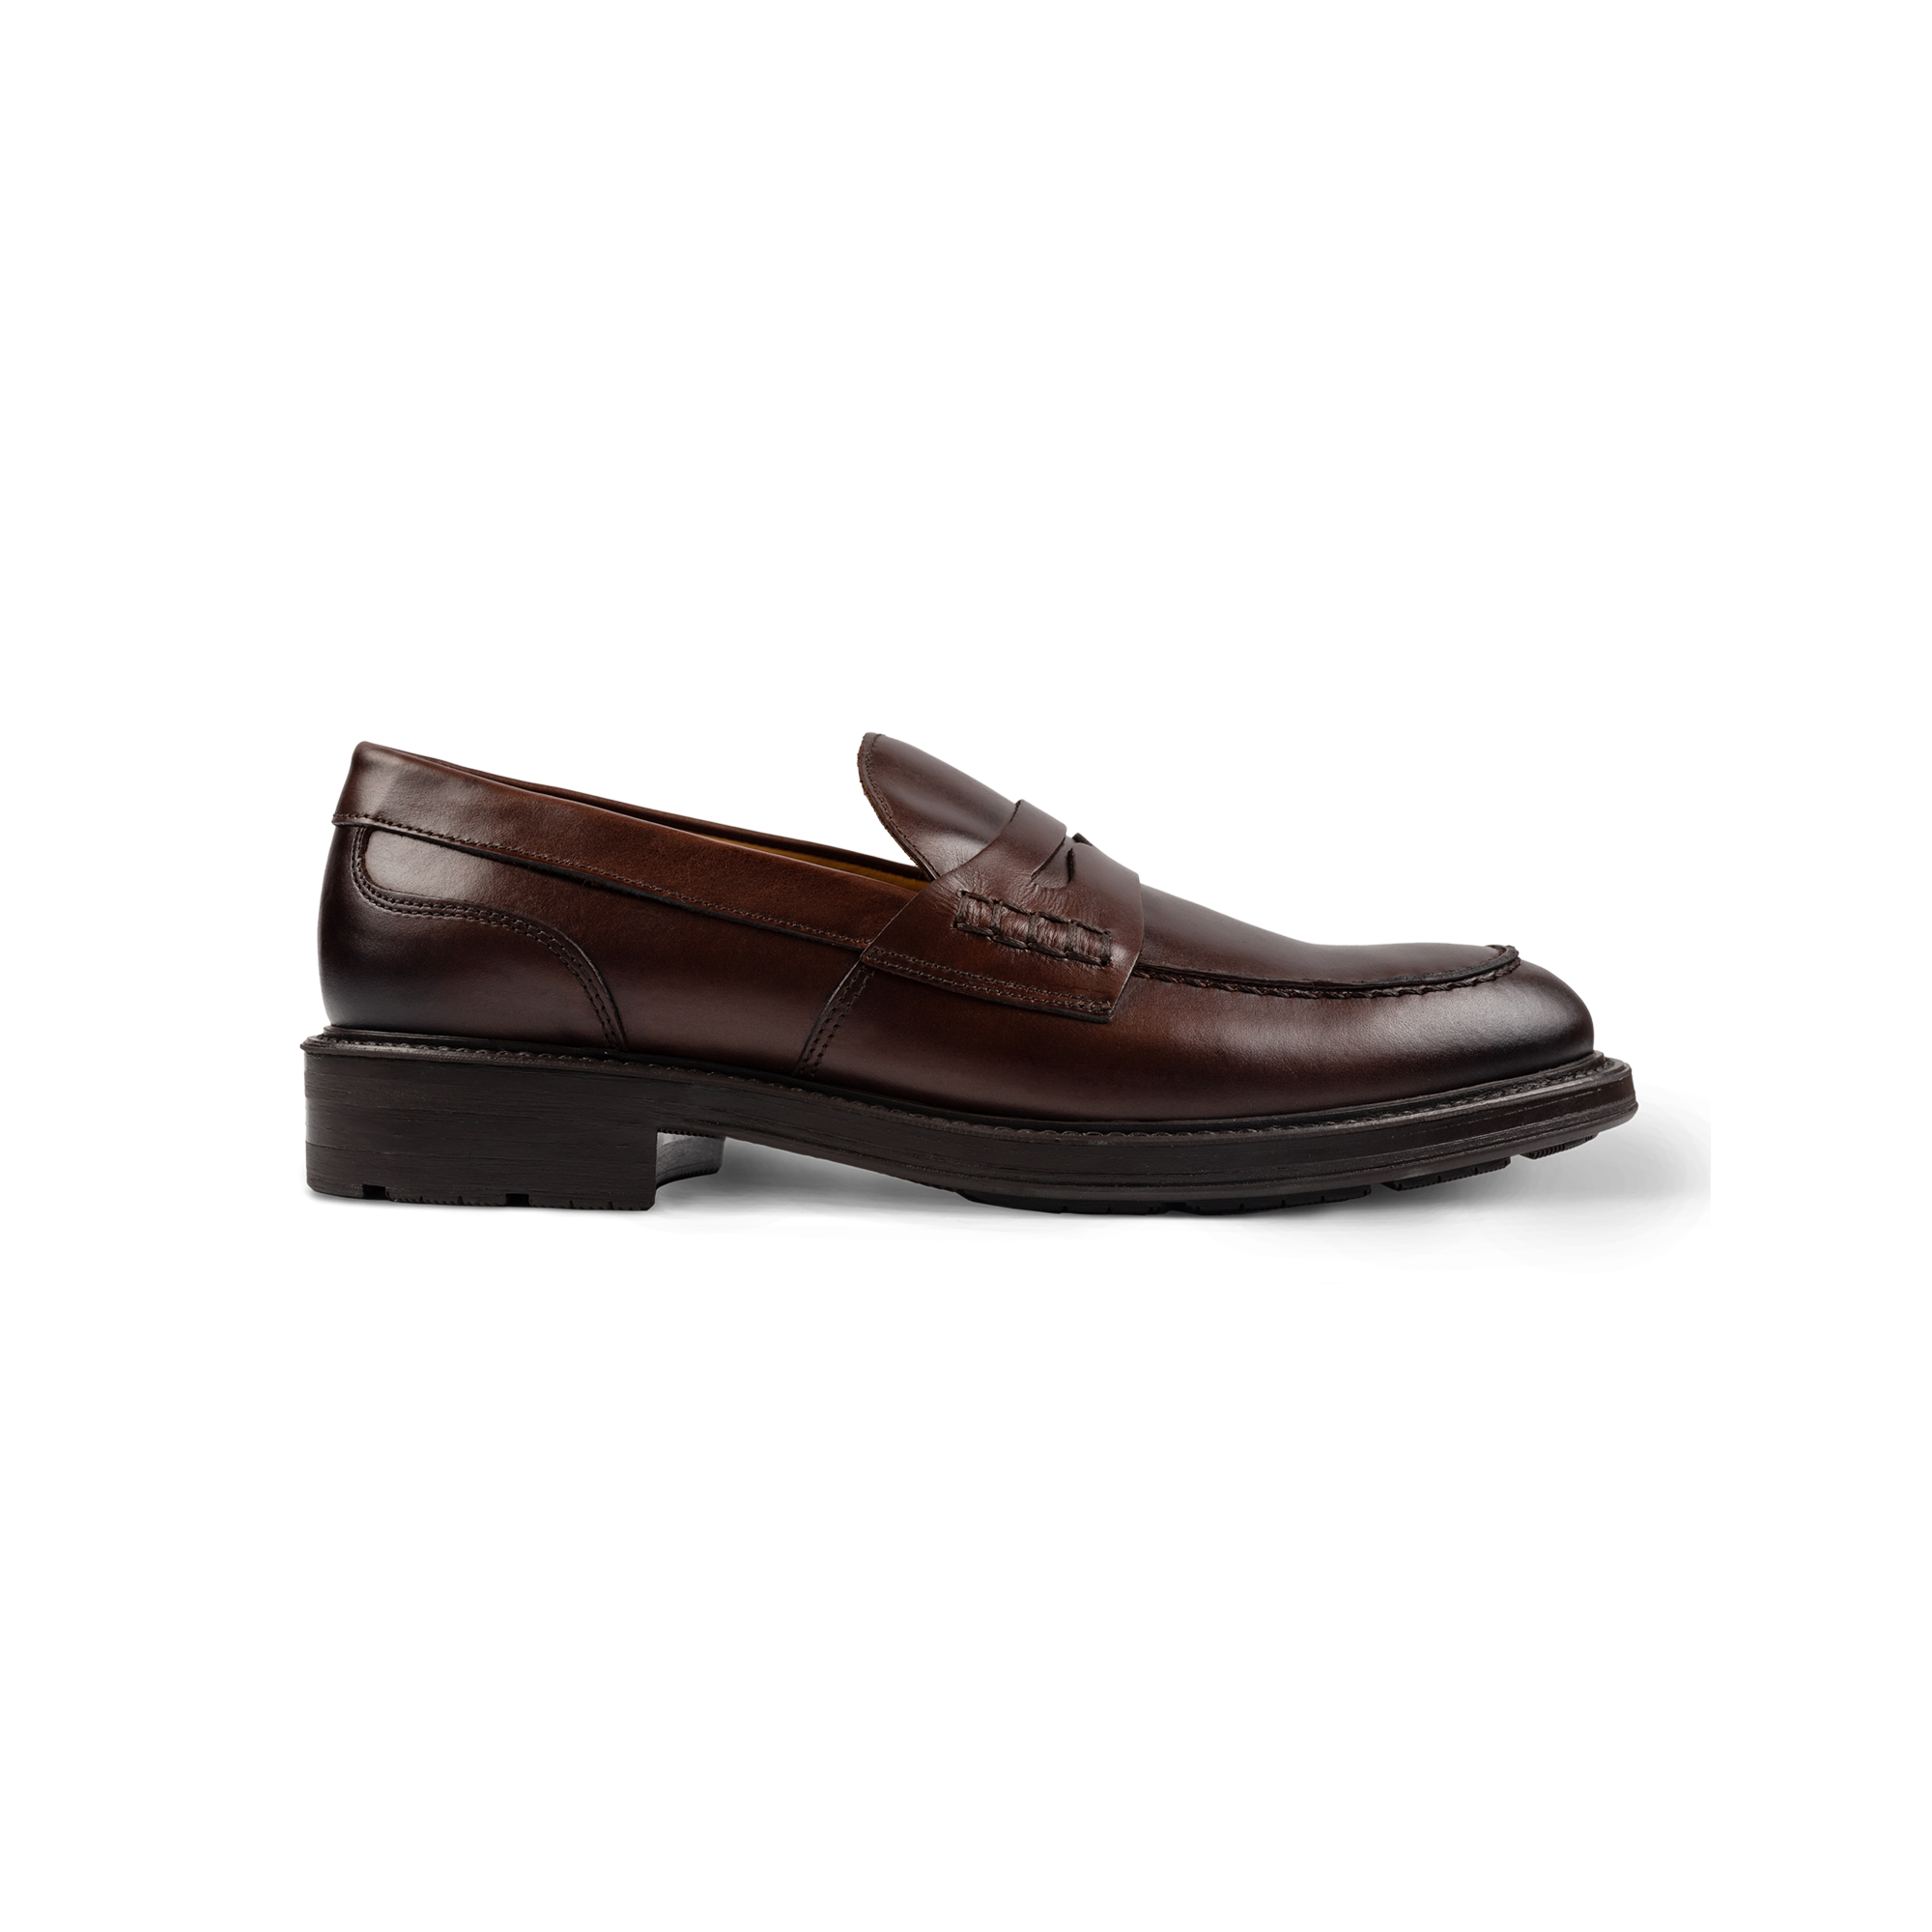 Men's Brown Penny Loafers